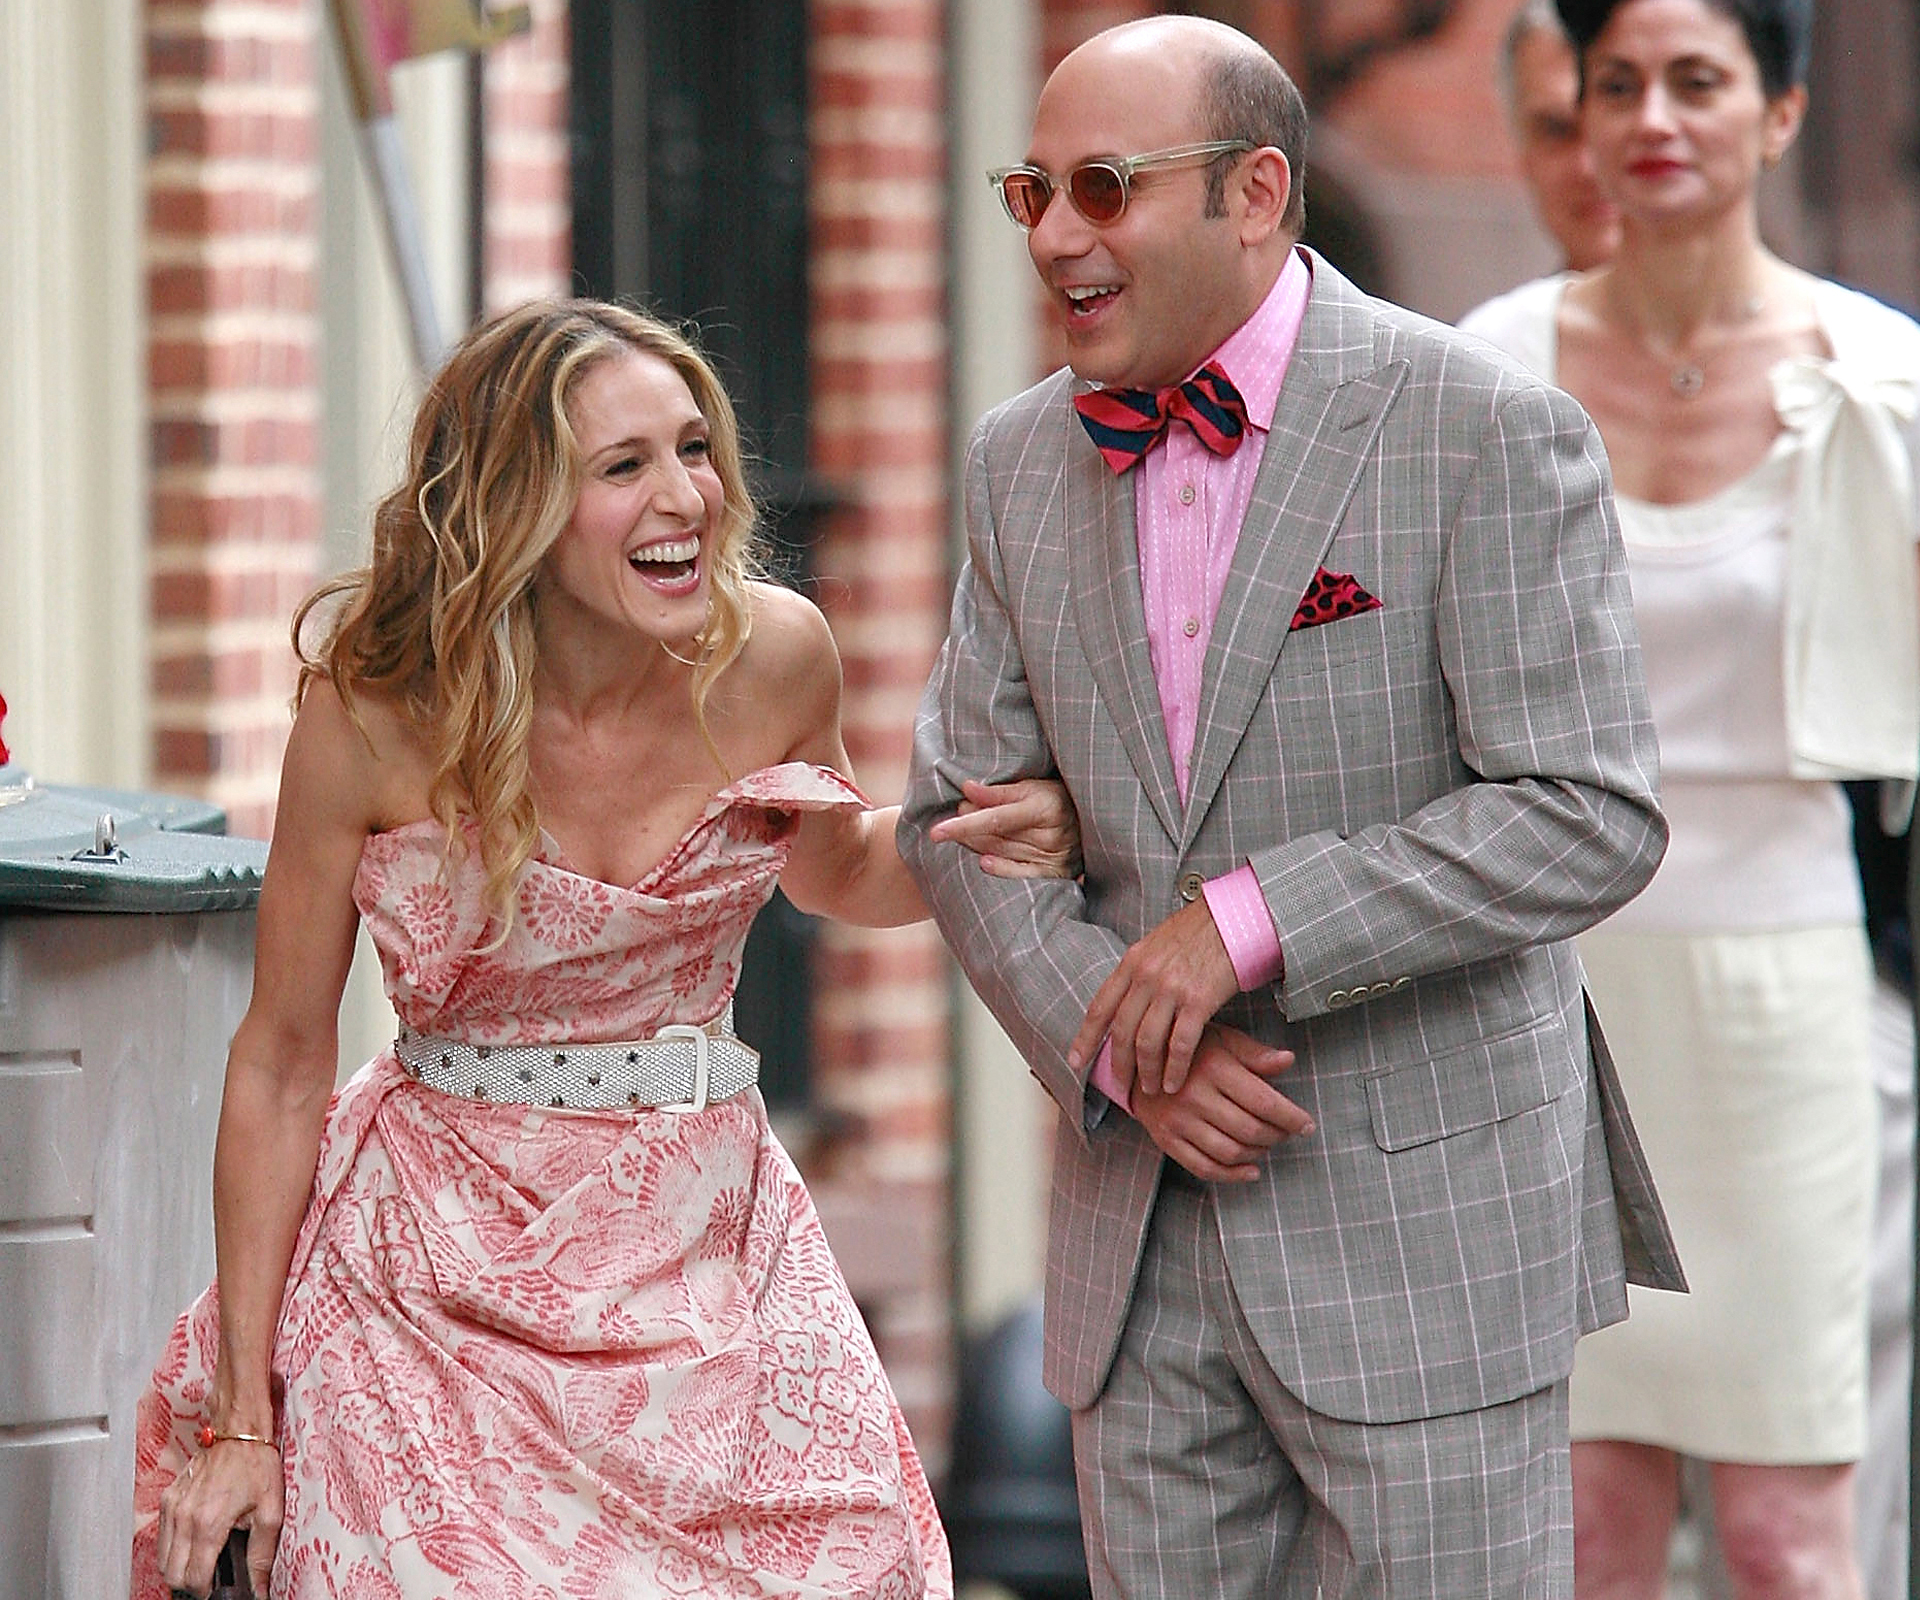 Sarah Jessica Parker was sent a treadmill by film producers